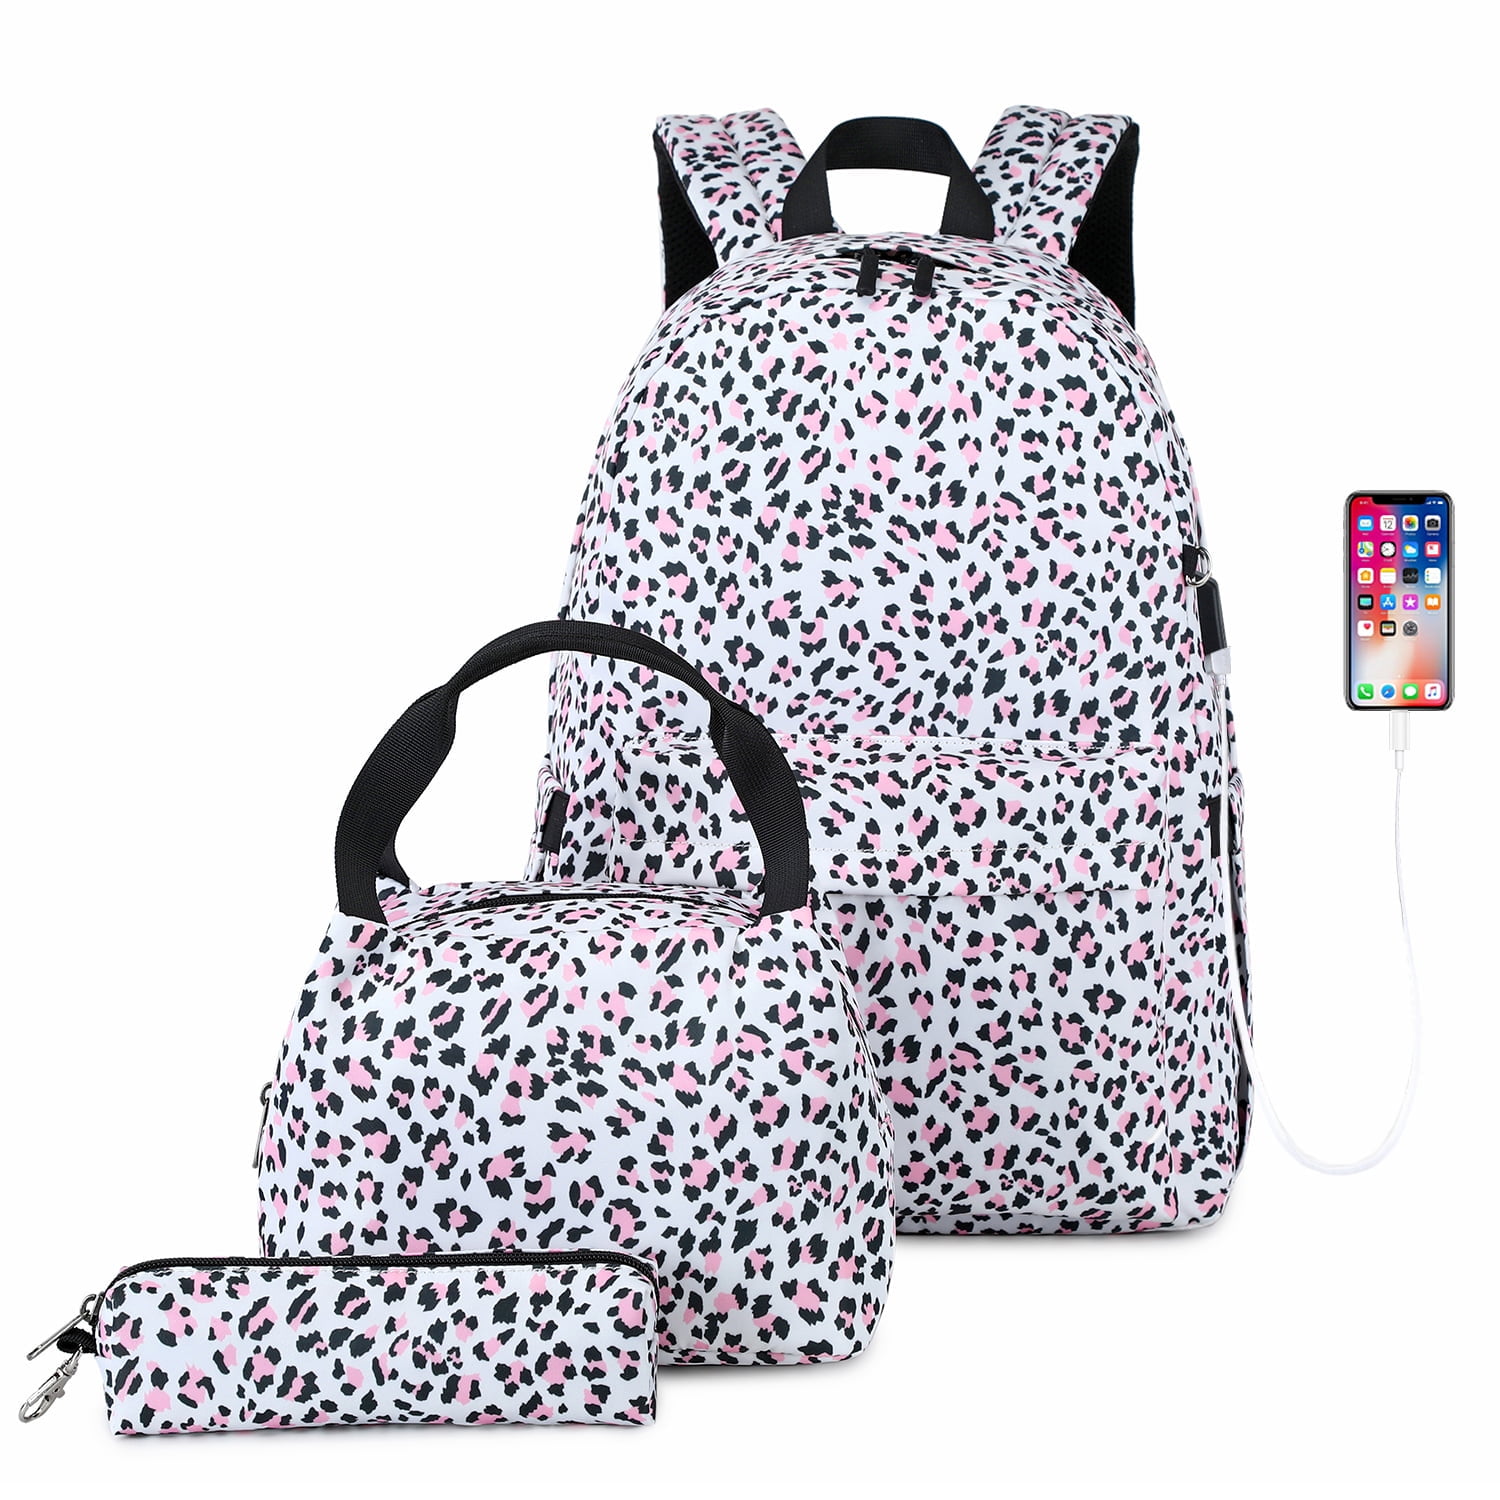 FKELYI 3 Pieces Brown Leopard Animal Cheetah Print School Bags for Kids  Girls Fashion Backpack Adjustable Shoulder Book Bag Set with Lunch Box  Pencil